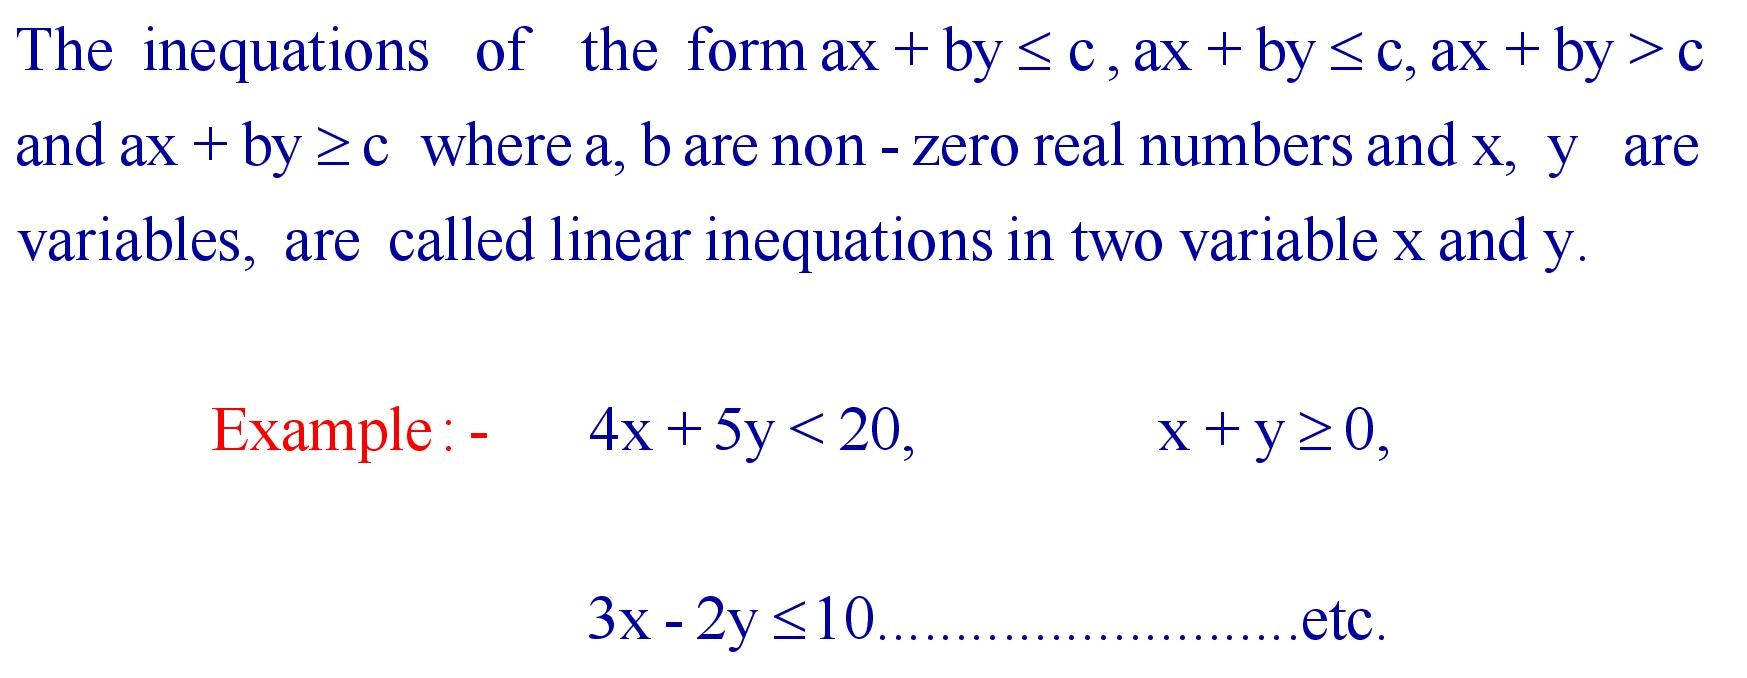 Linear Inequations in two variable